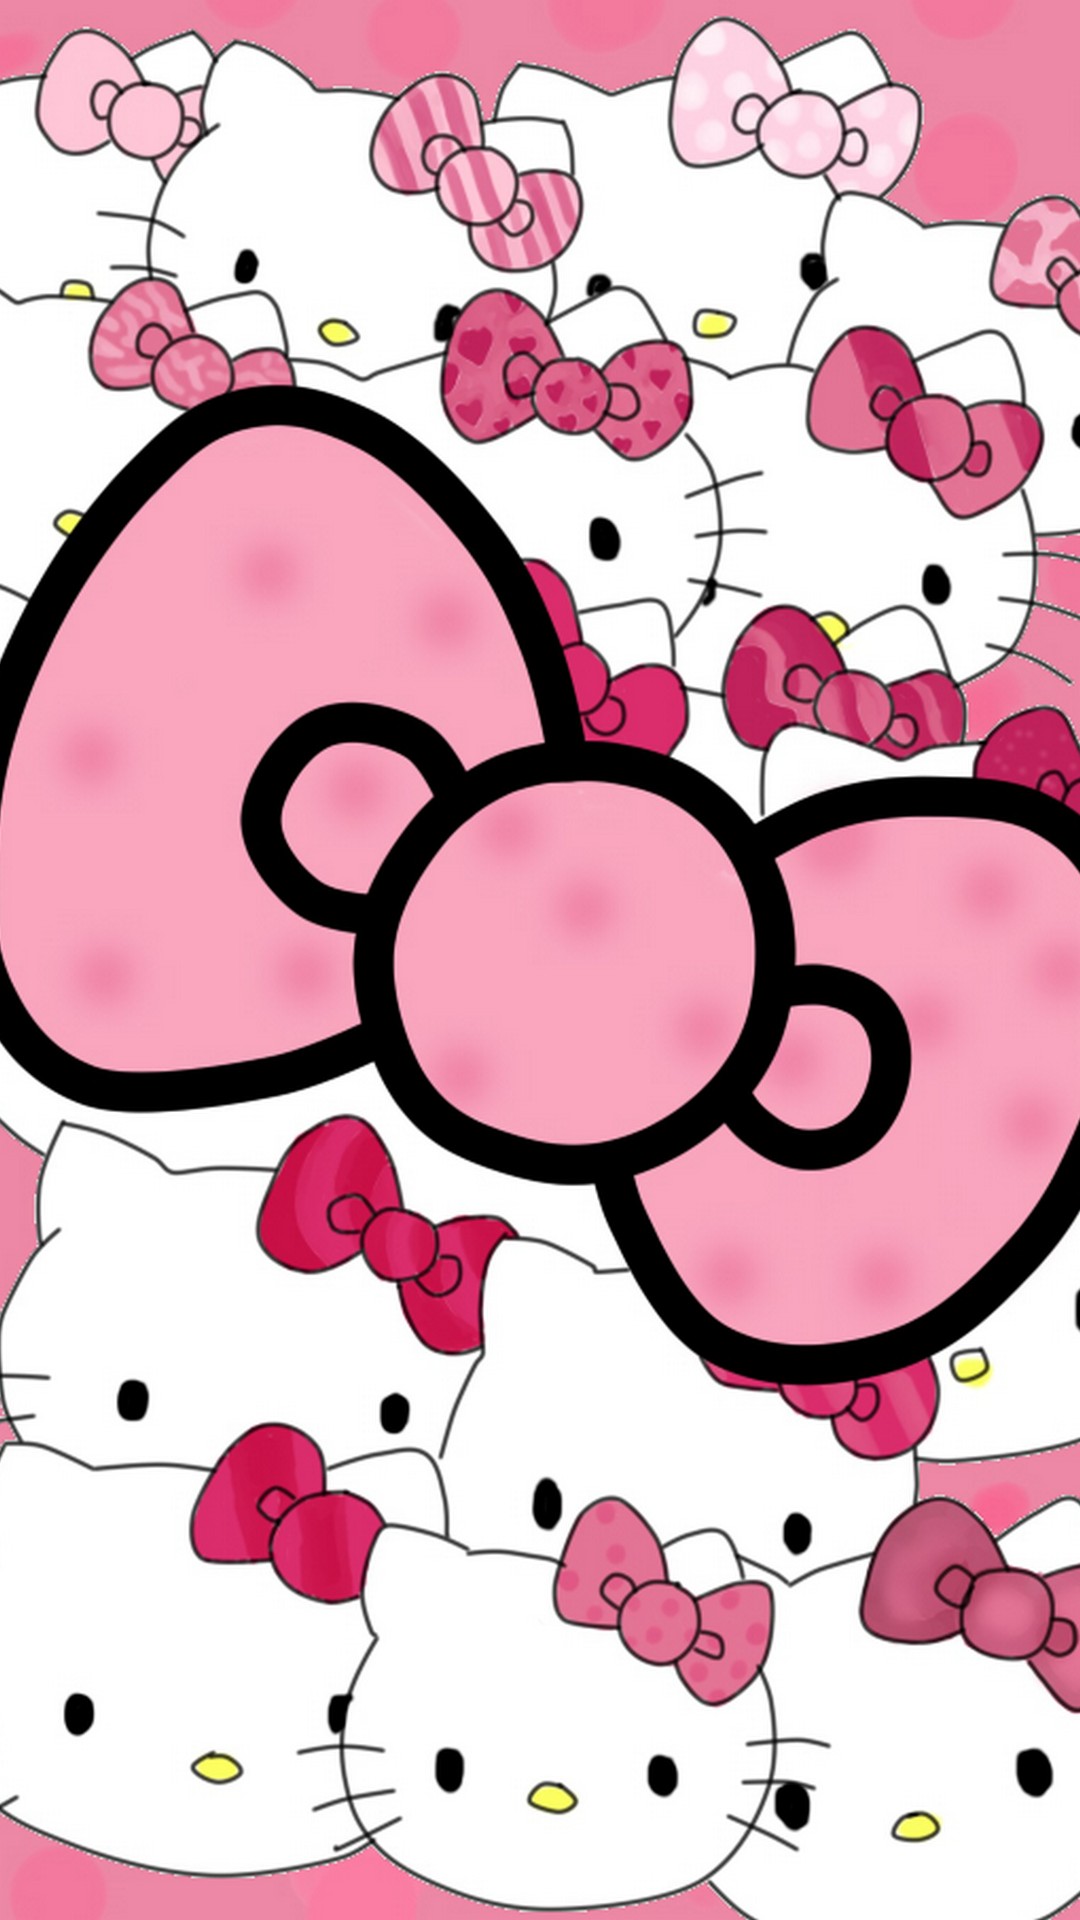 Sanrio Hello Kitty Wallpaper For Android with image resolution 1080x1920 pixel. You can make this wallpaper for your Android backgrounds, Tablet, Smartphones Screensavers and Mobile Phone Lock Screen